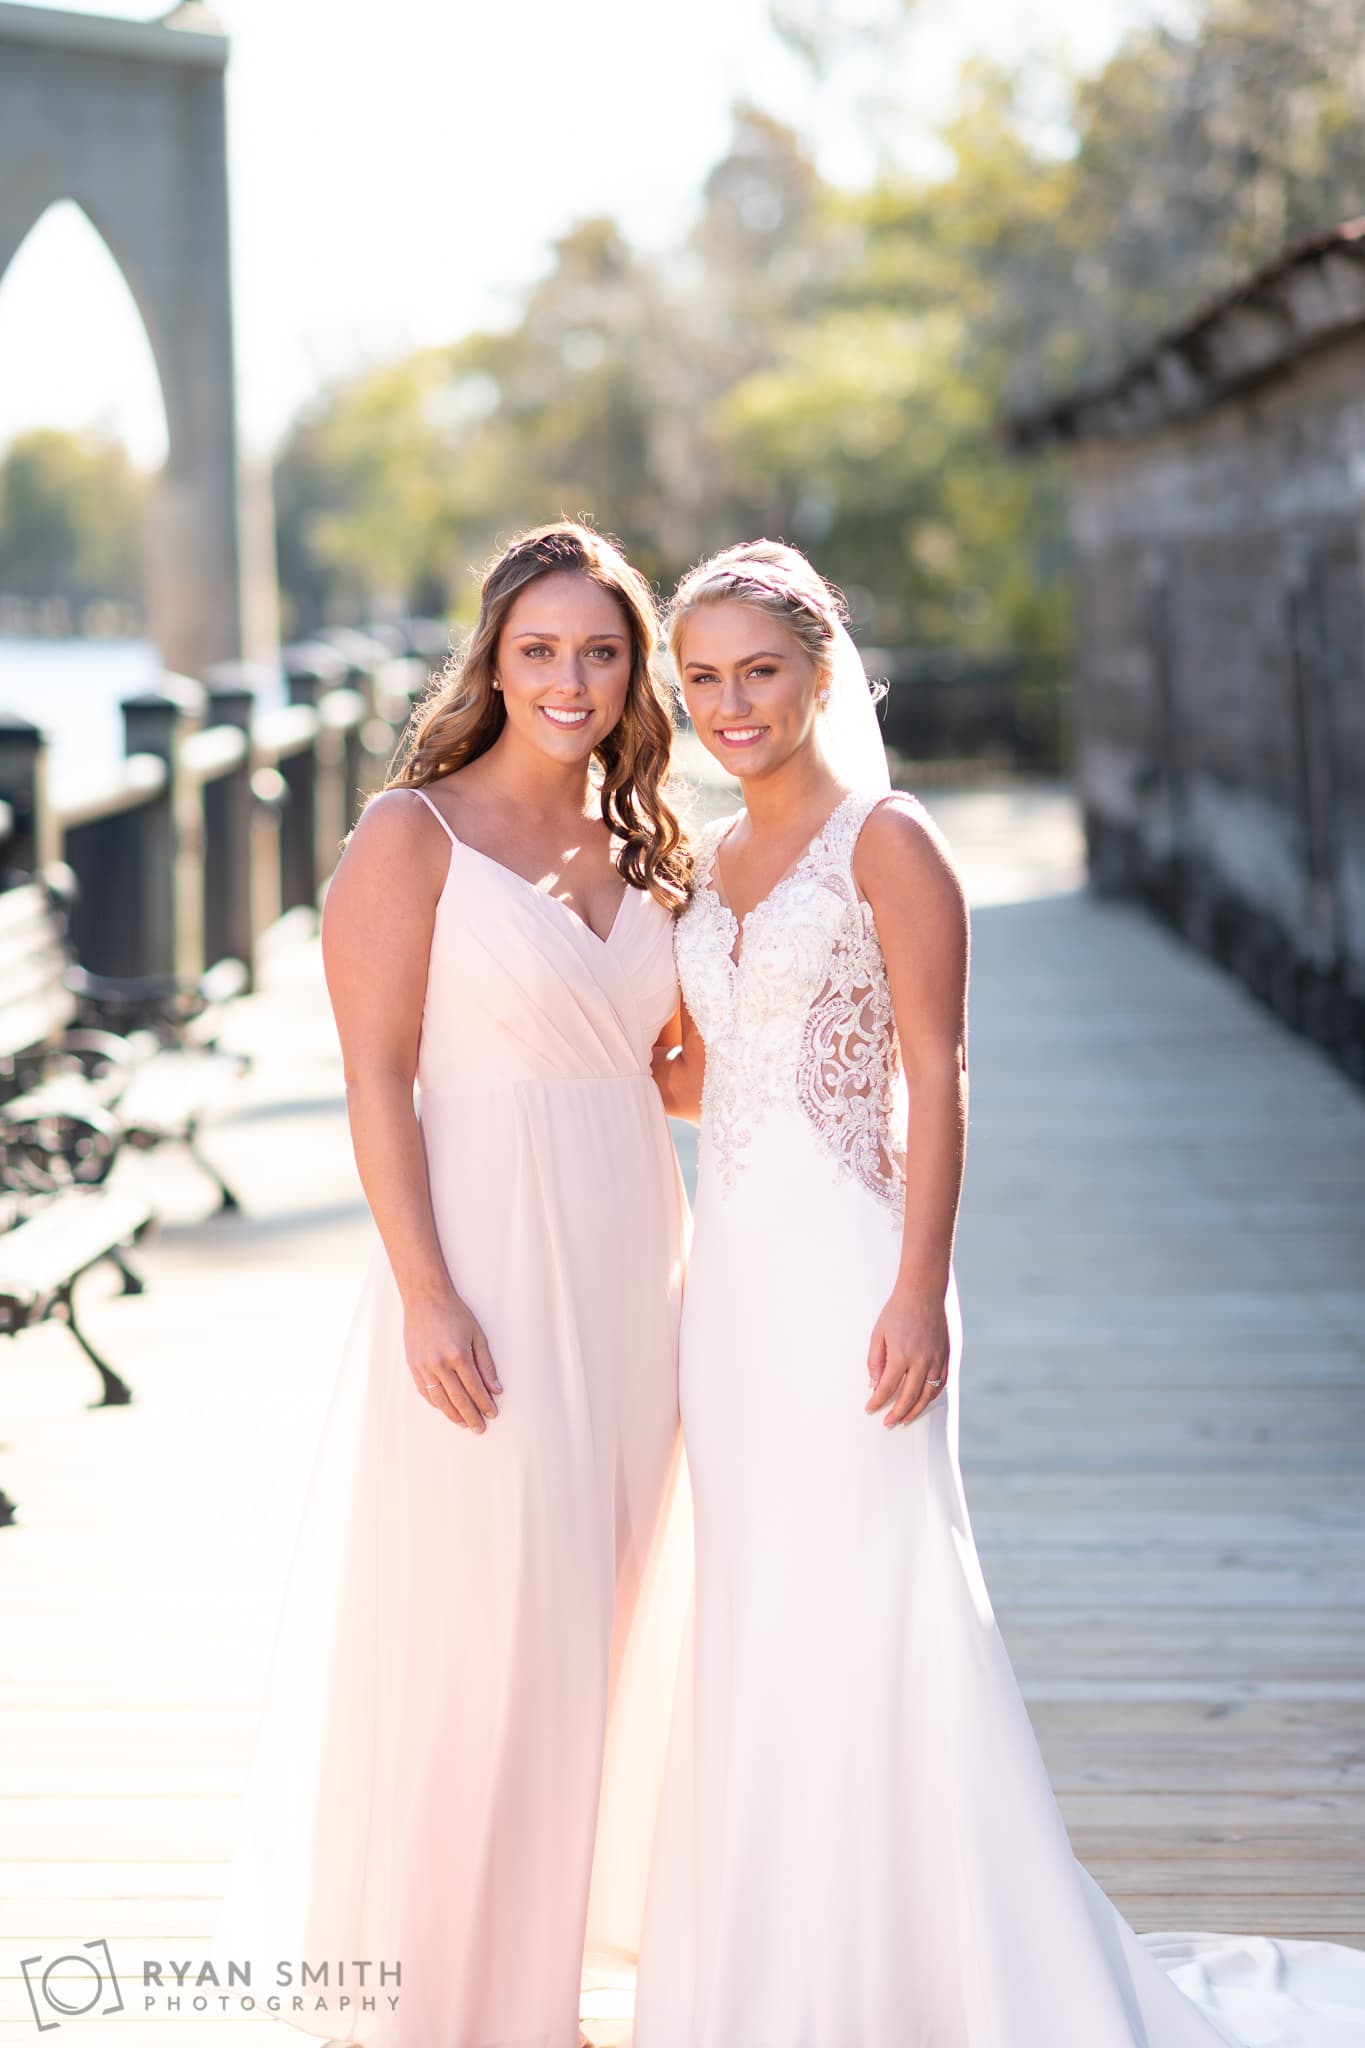 Individual portraits with each bridesmaid and bride -